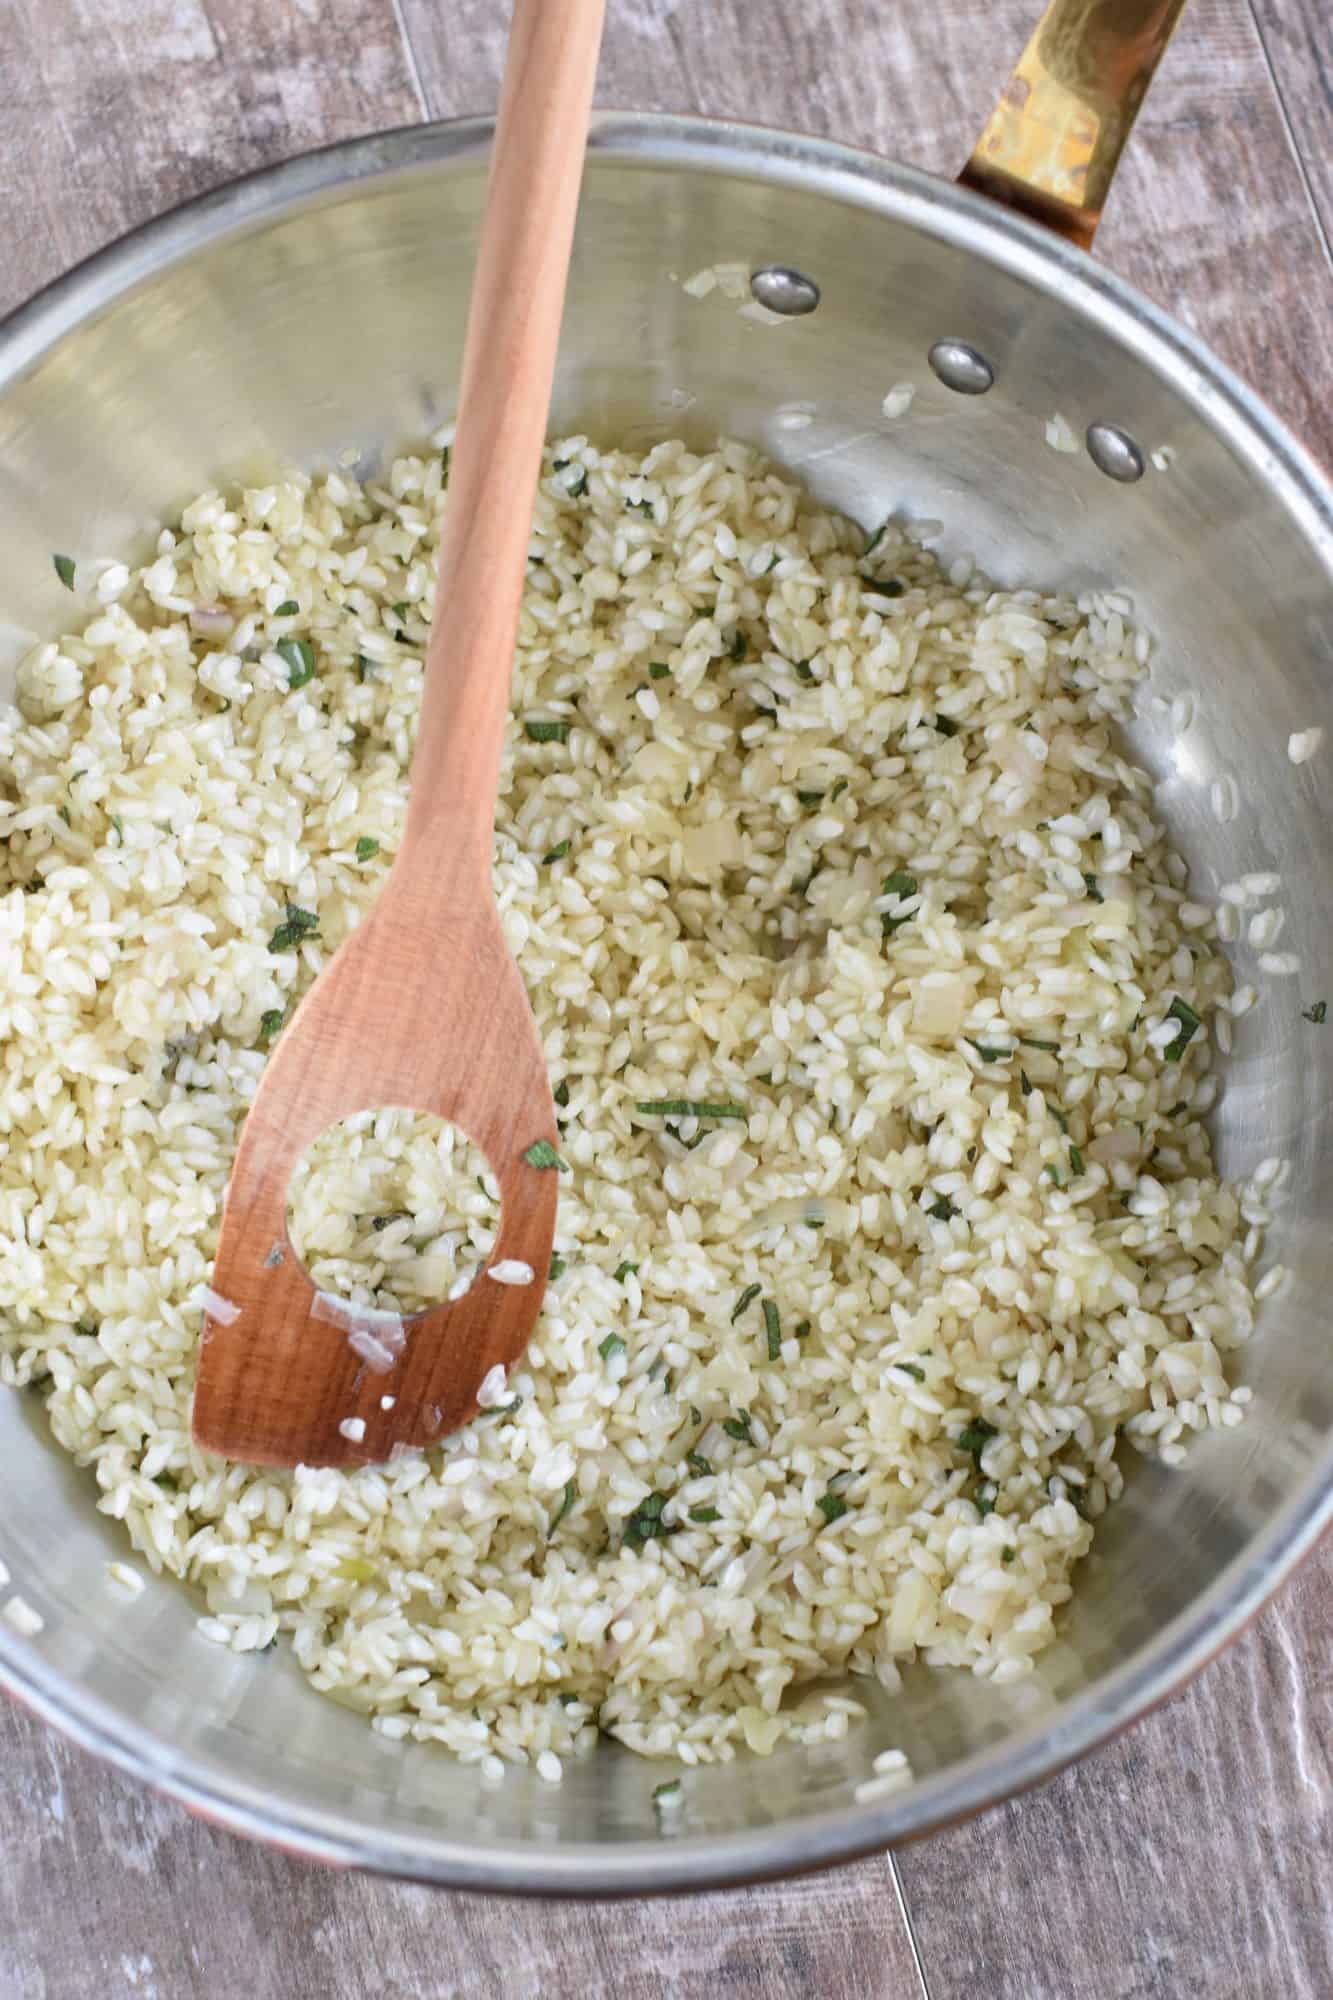 Arborio rice stirred into the sage, shallot and olive oil mixture to coat